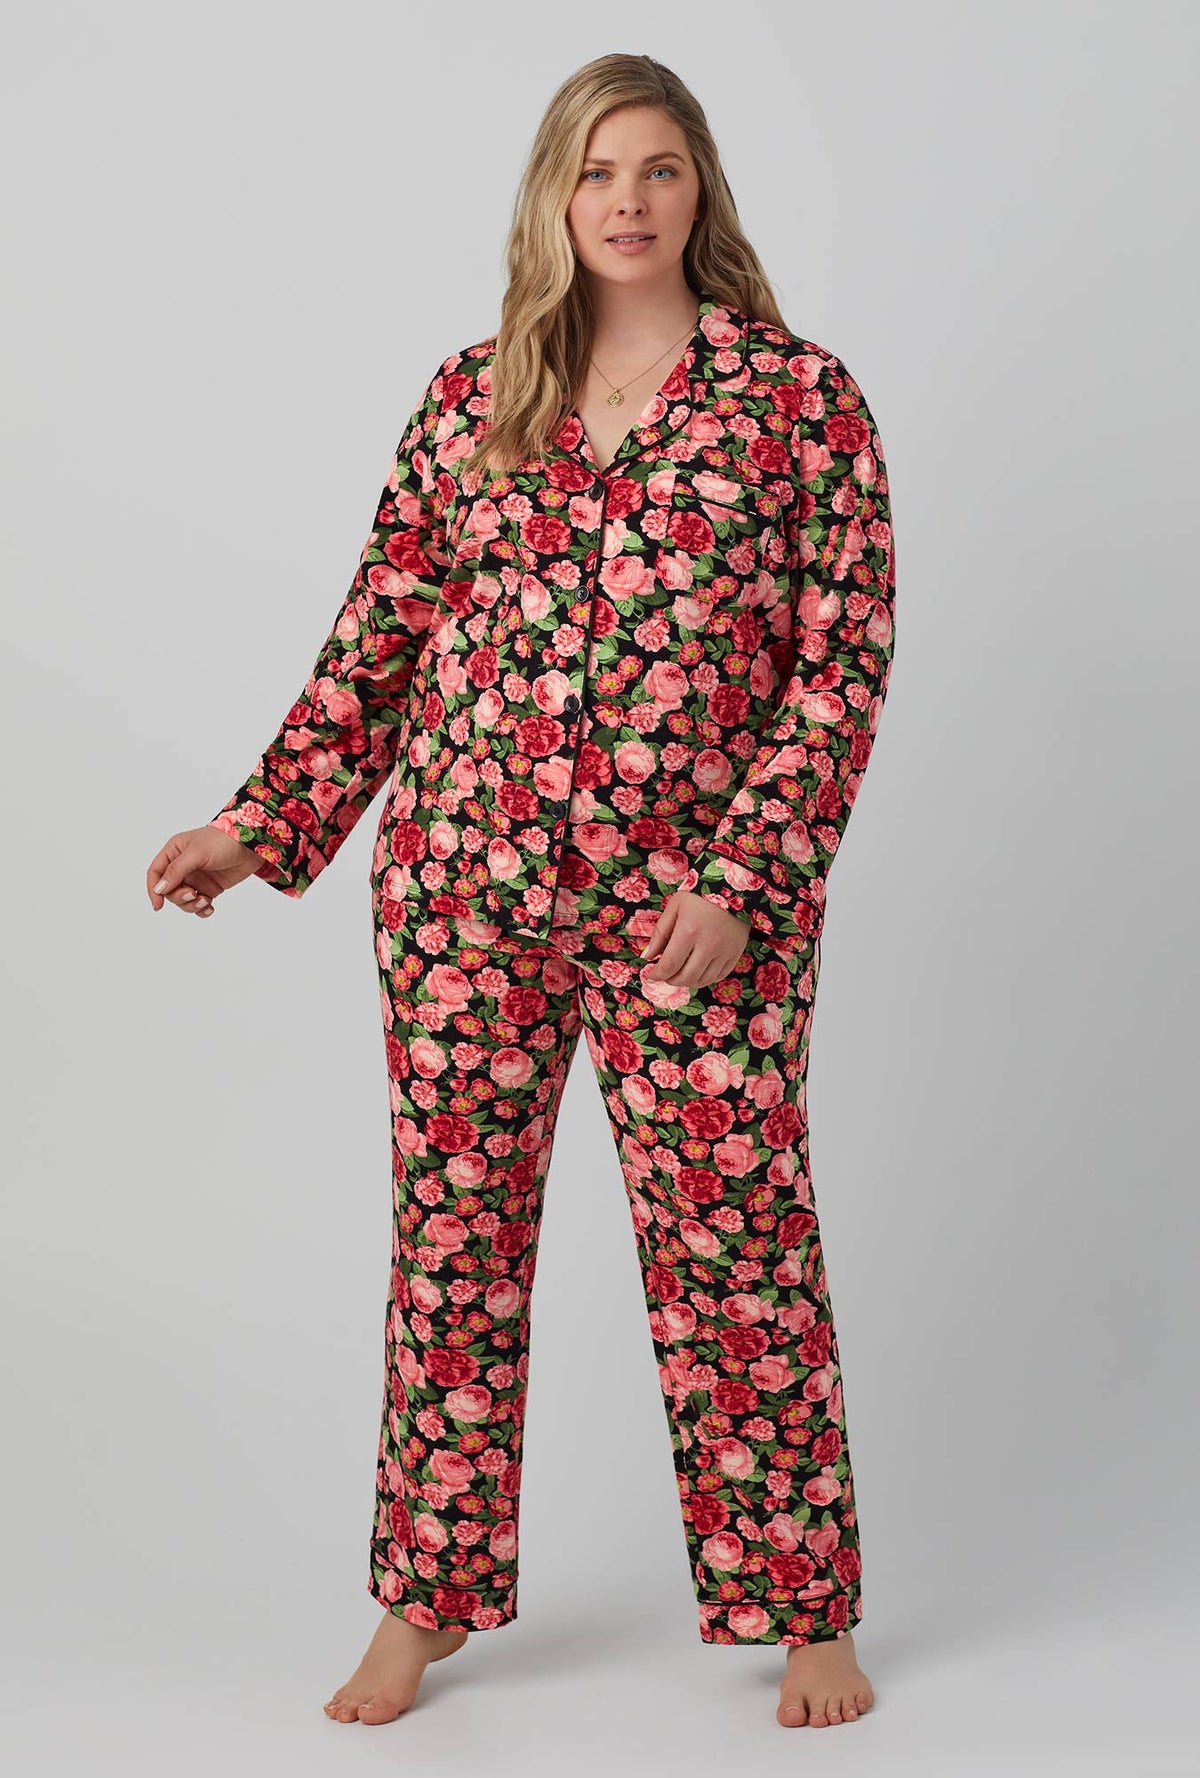 A lady wearing  Long Sleeve Classic Stretch Jersey PJ Set with Roses are Red print